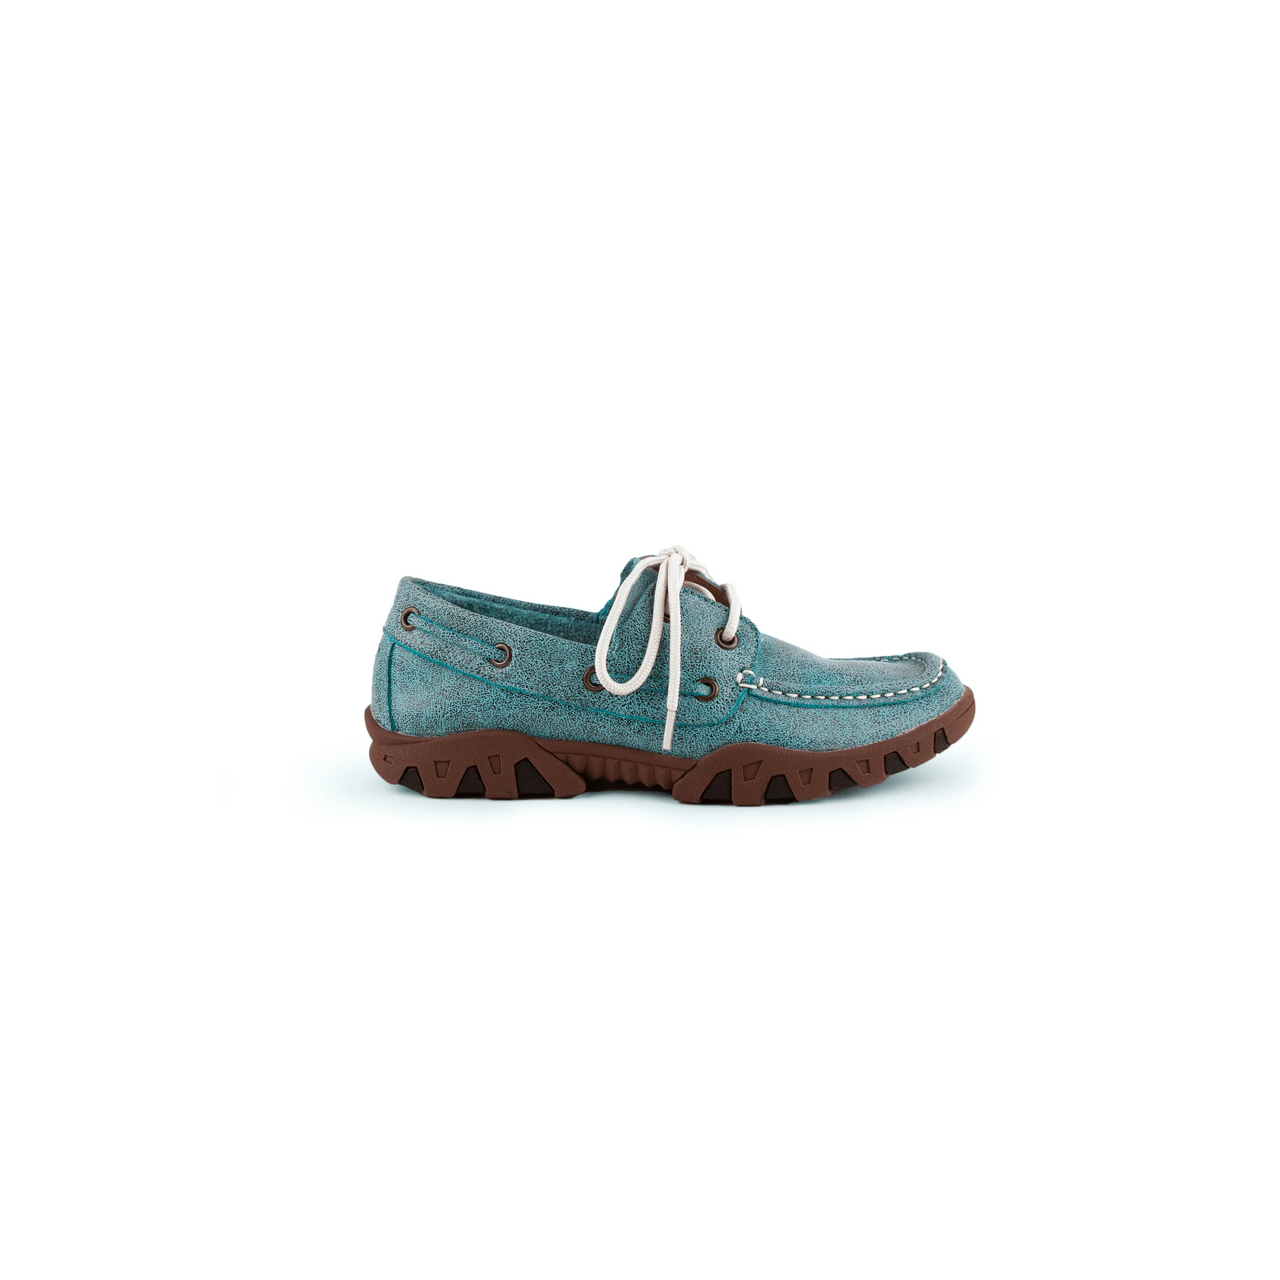 Ferrini Womens Loafer Casual Shoes - Turquoise